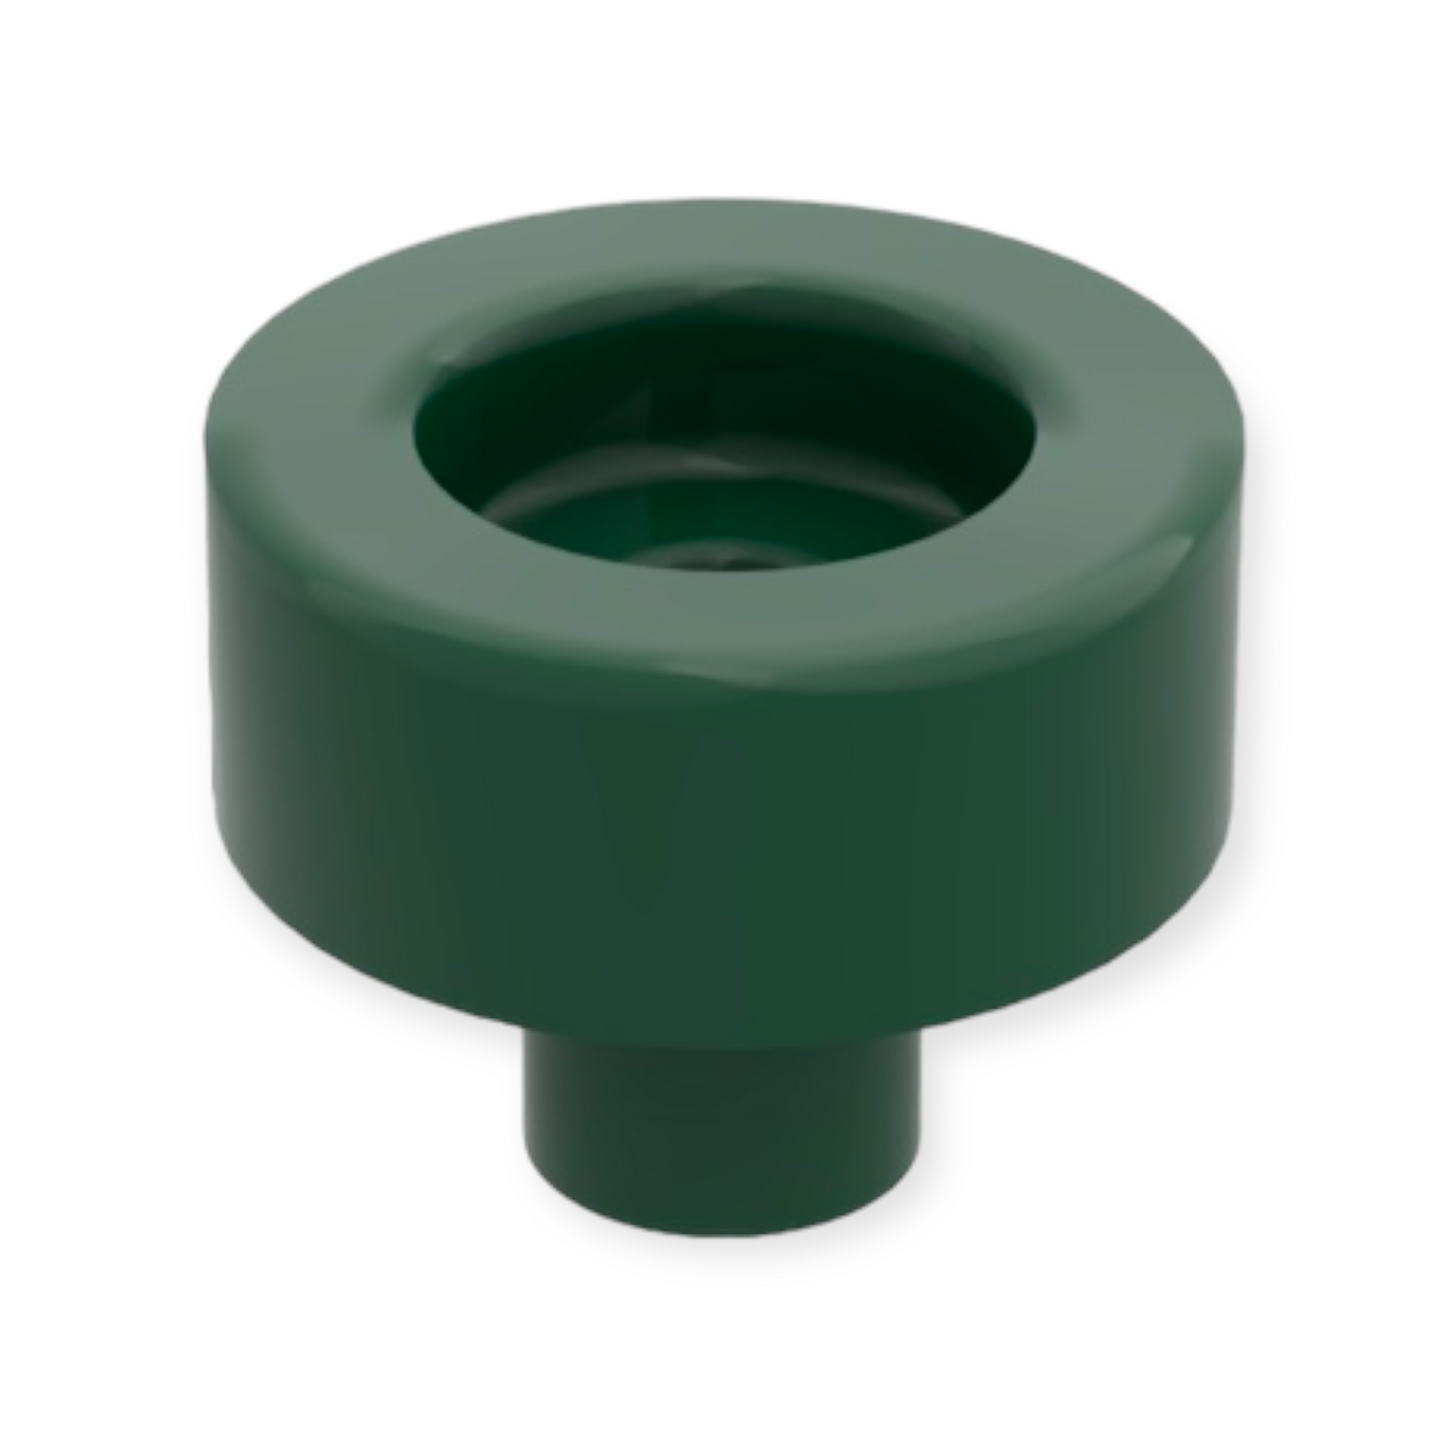 LEGO Tile Round 1x1 with Bar and Pin Holder - Dark Green